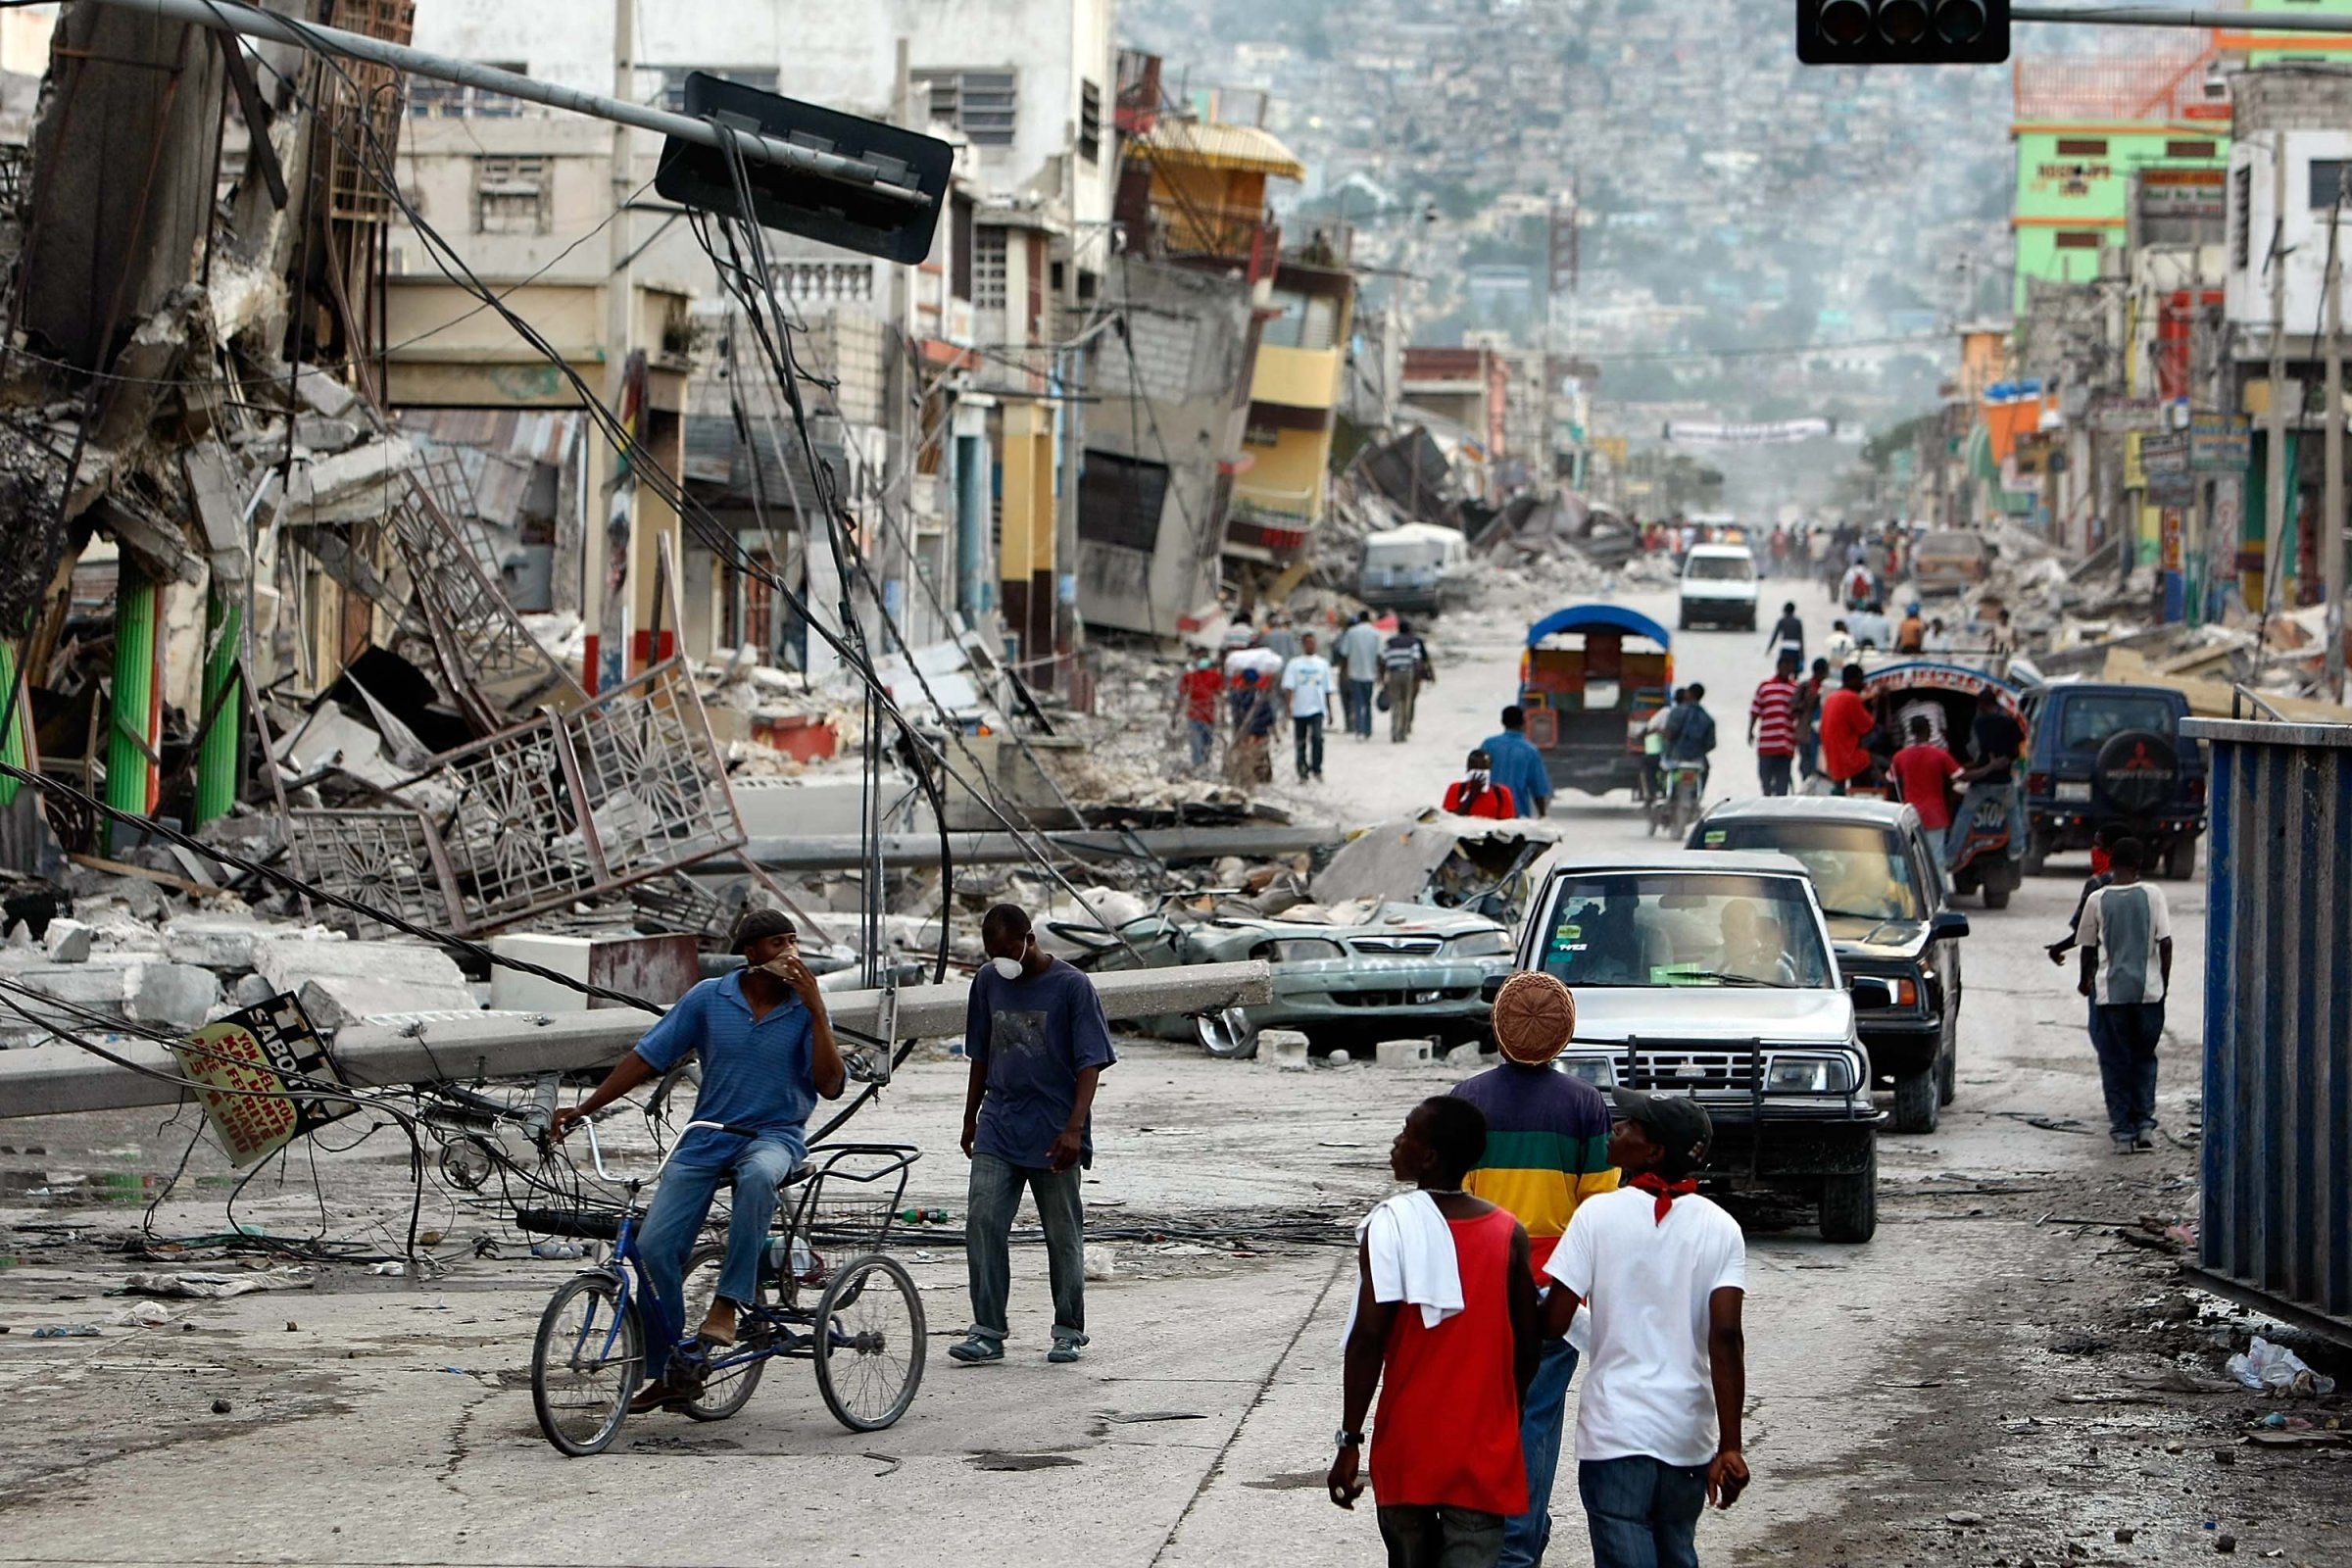 Haiti Struggles With Death And Destruction After Catastrophic Earthquake